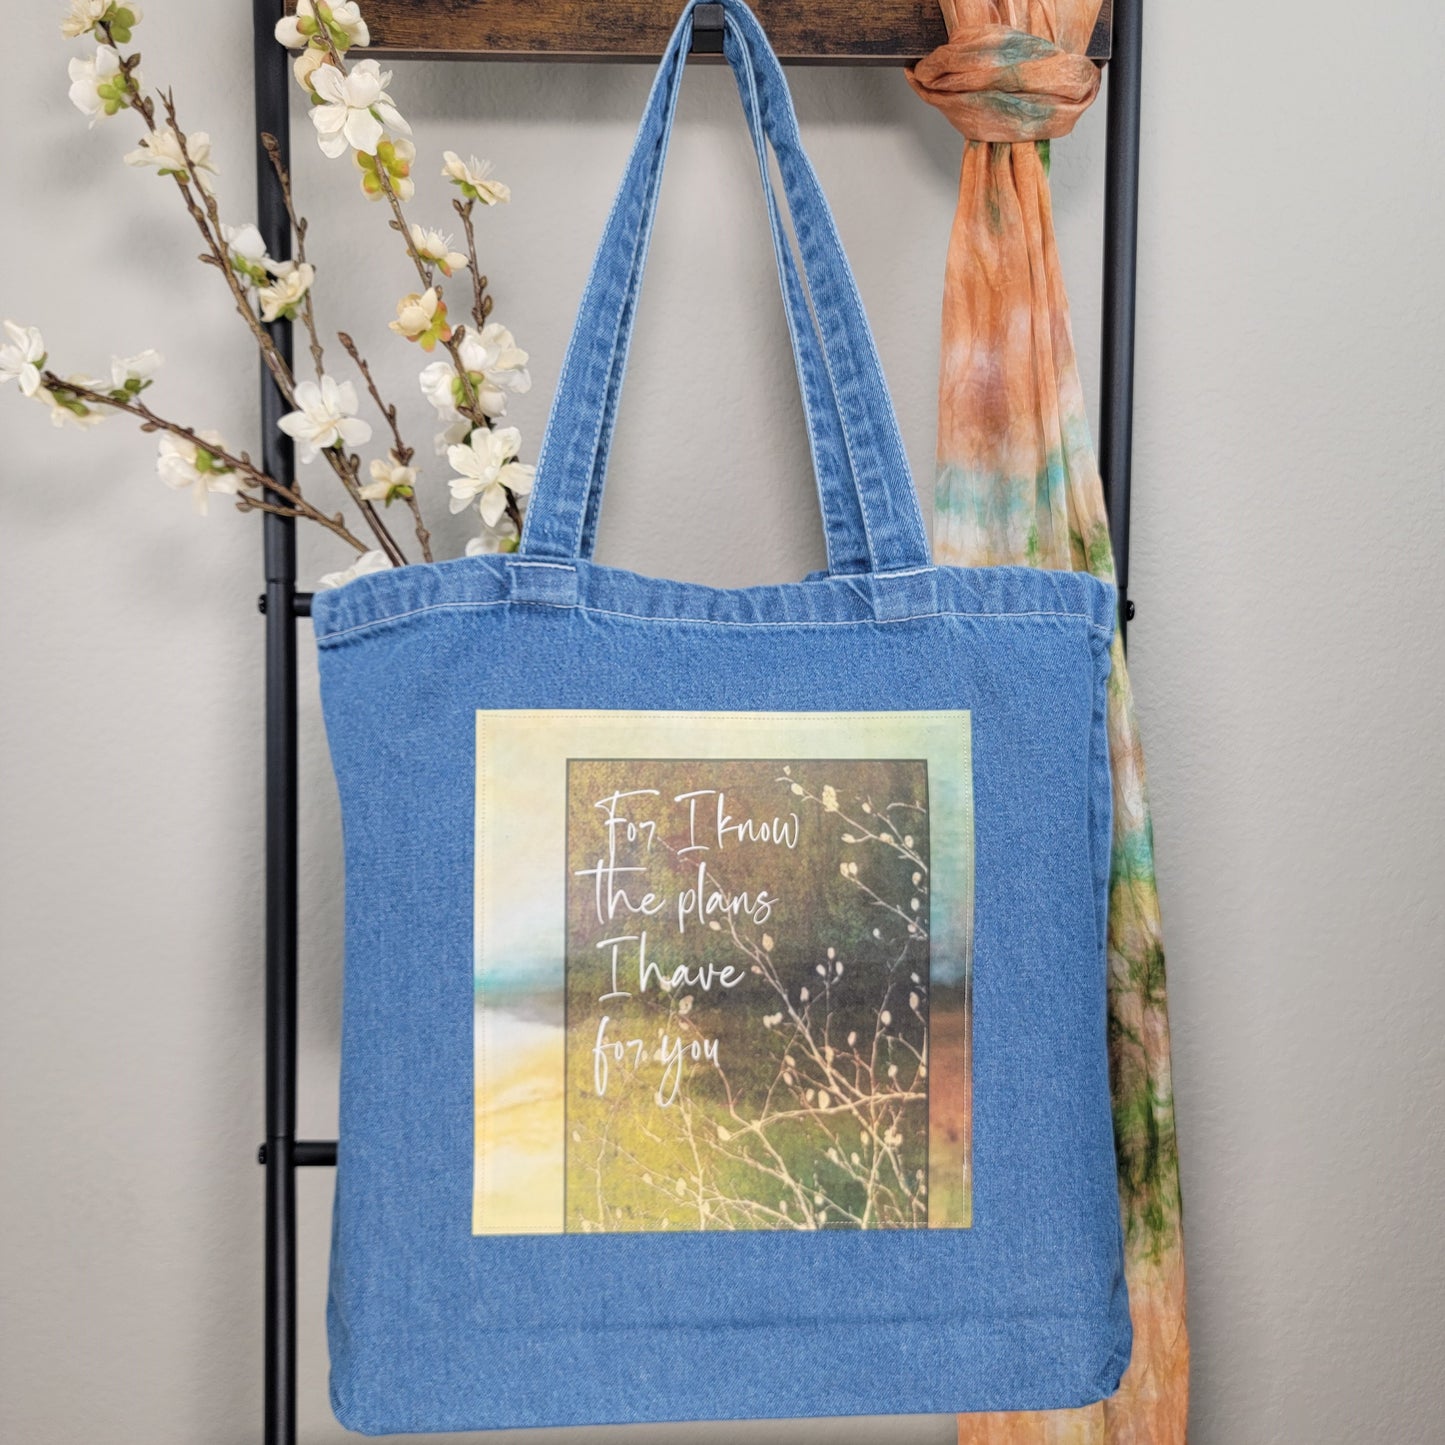 For I know the plans I have for you - Totebag - 1